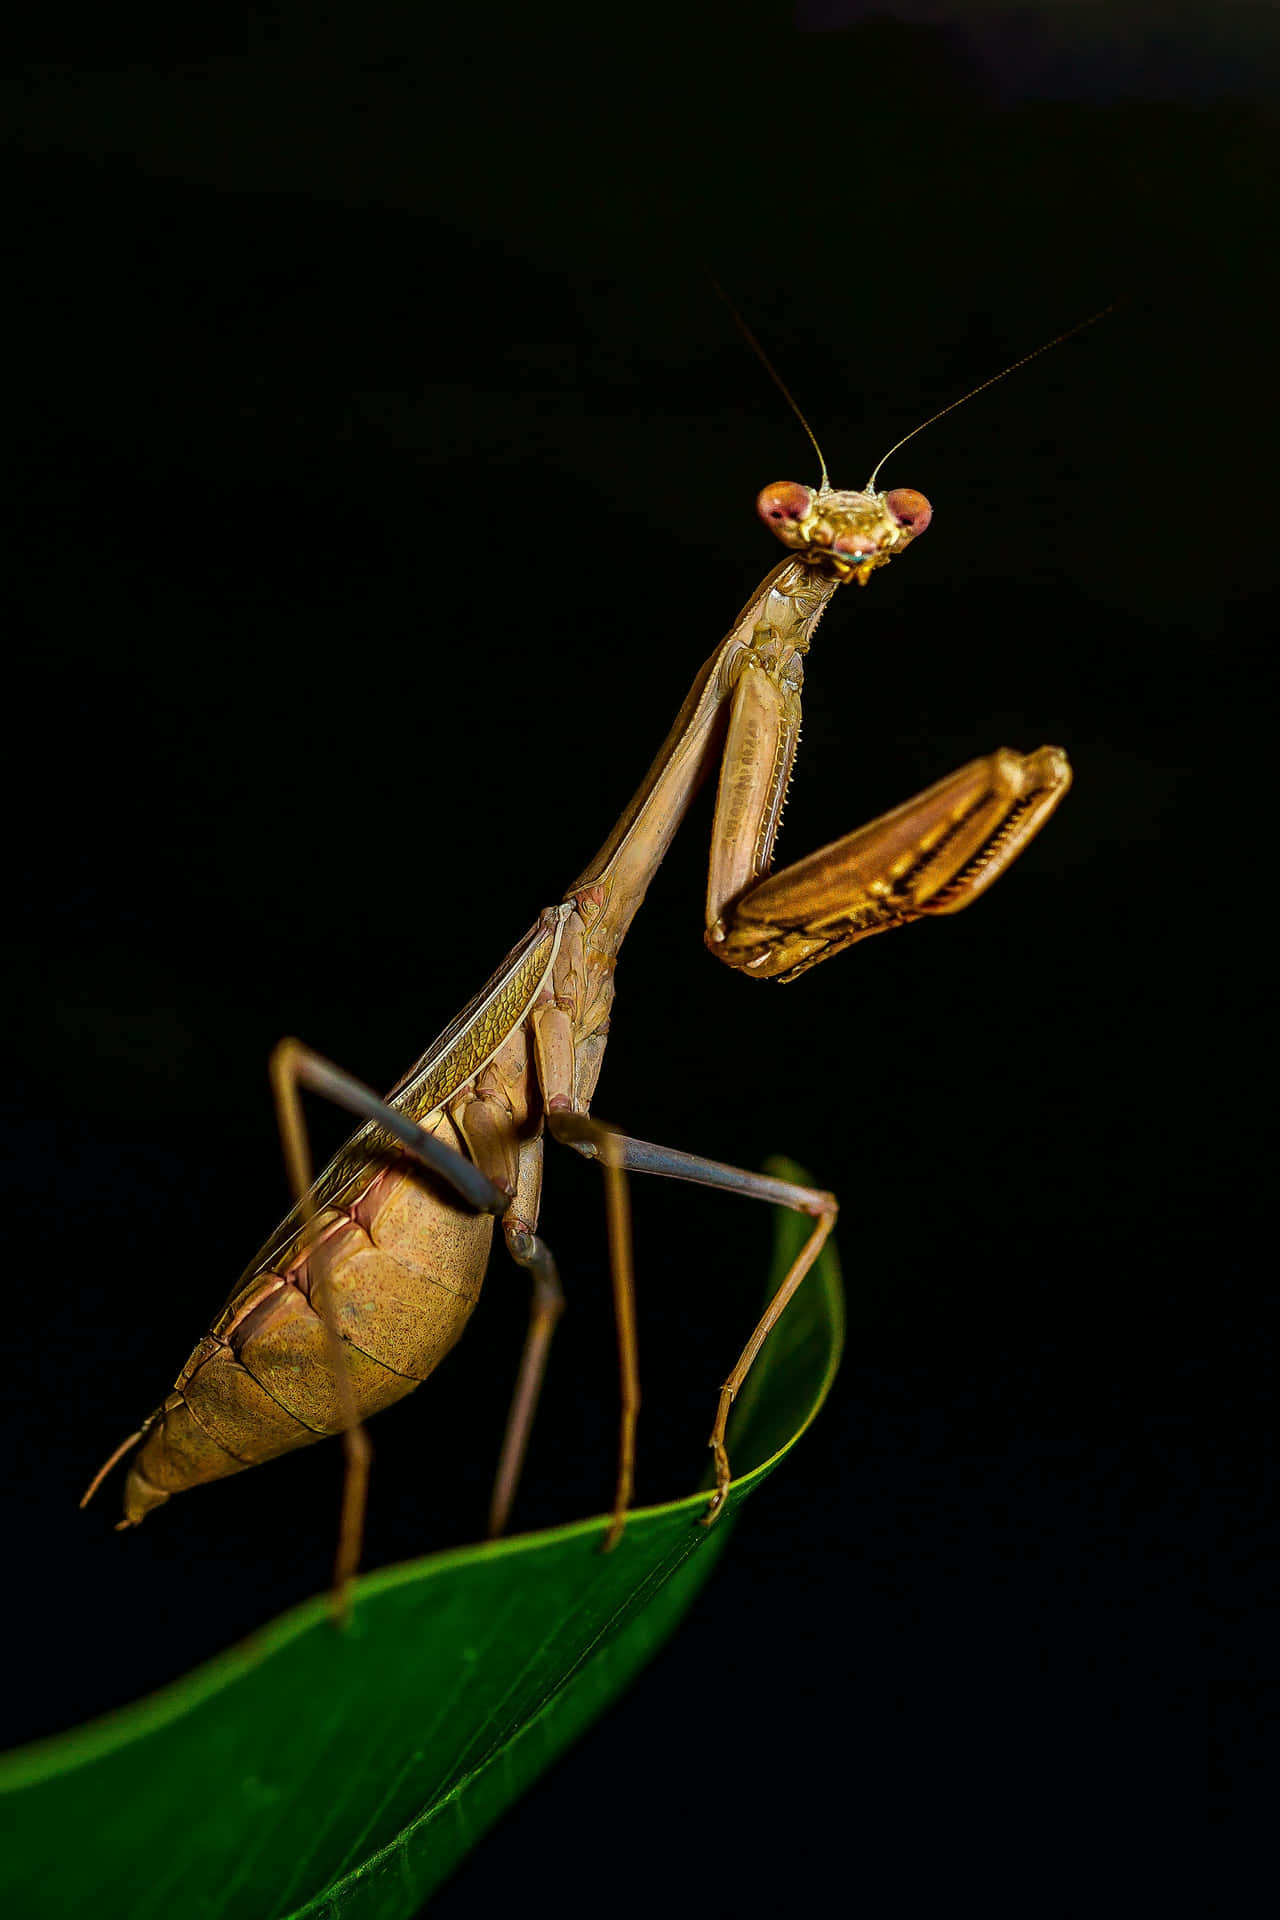 Brunainsekter Som Kallas Mantis. (note: In Swedish, Word Order Is Typically Subject-verb-object, So The Order Of The Words In The Sentence Has Changed Slightly.) Wallpaper